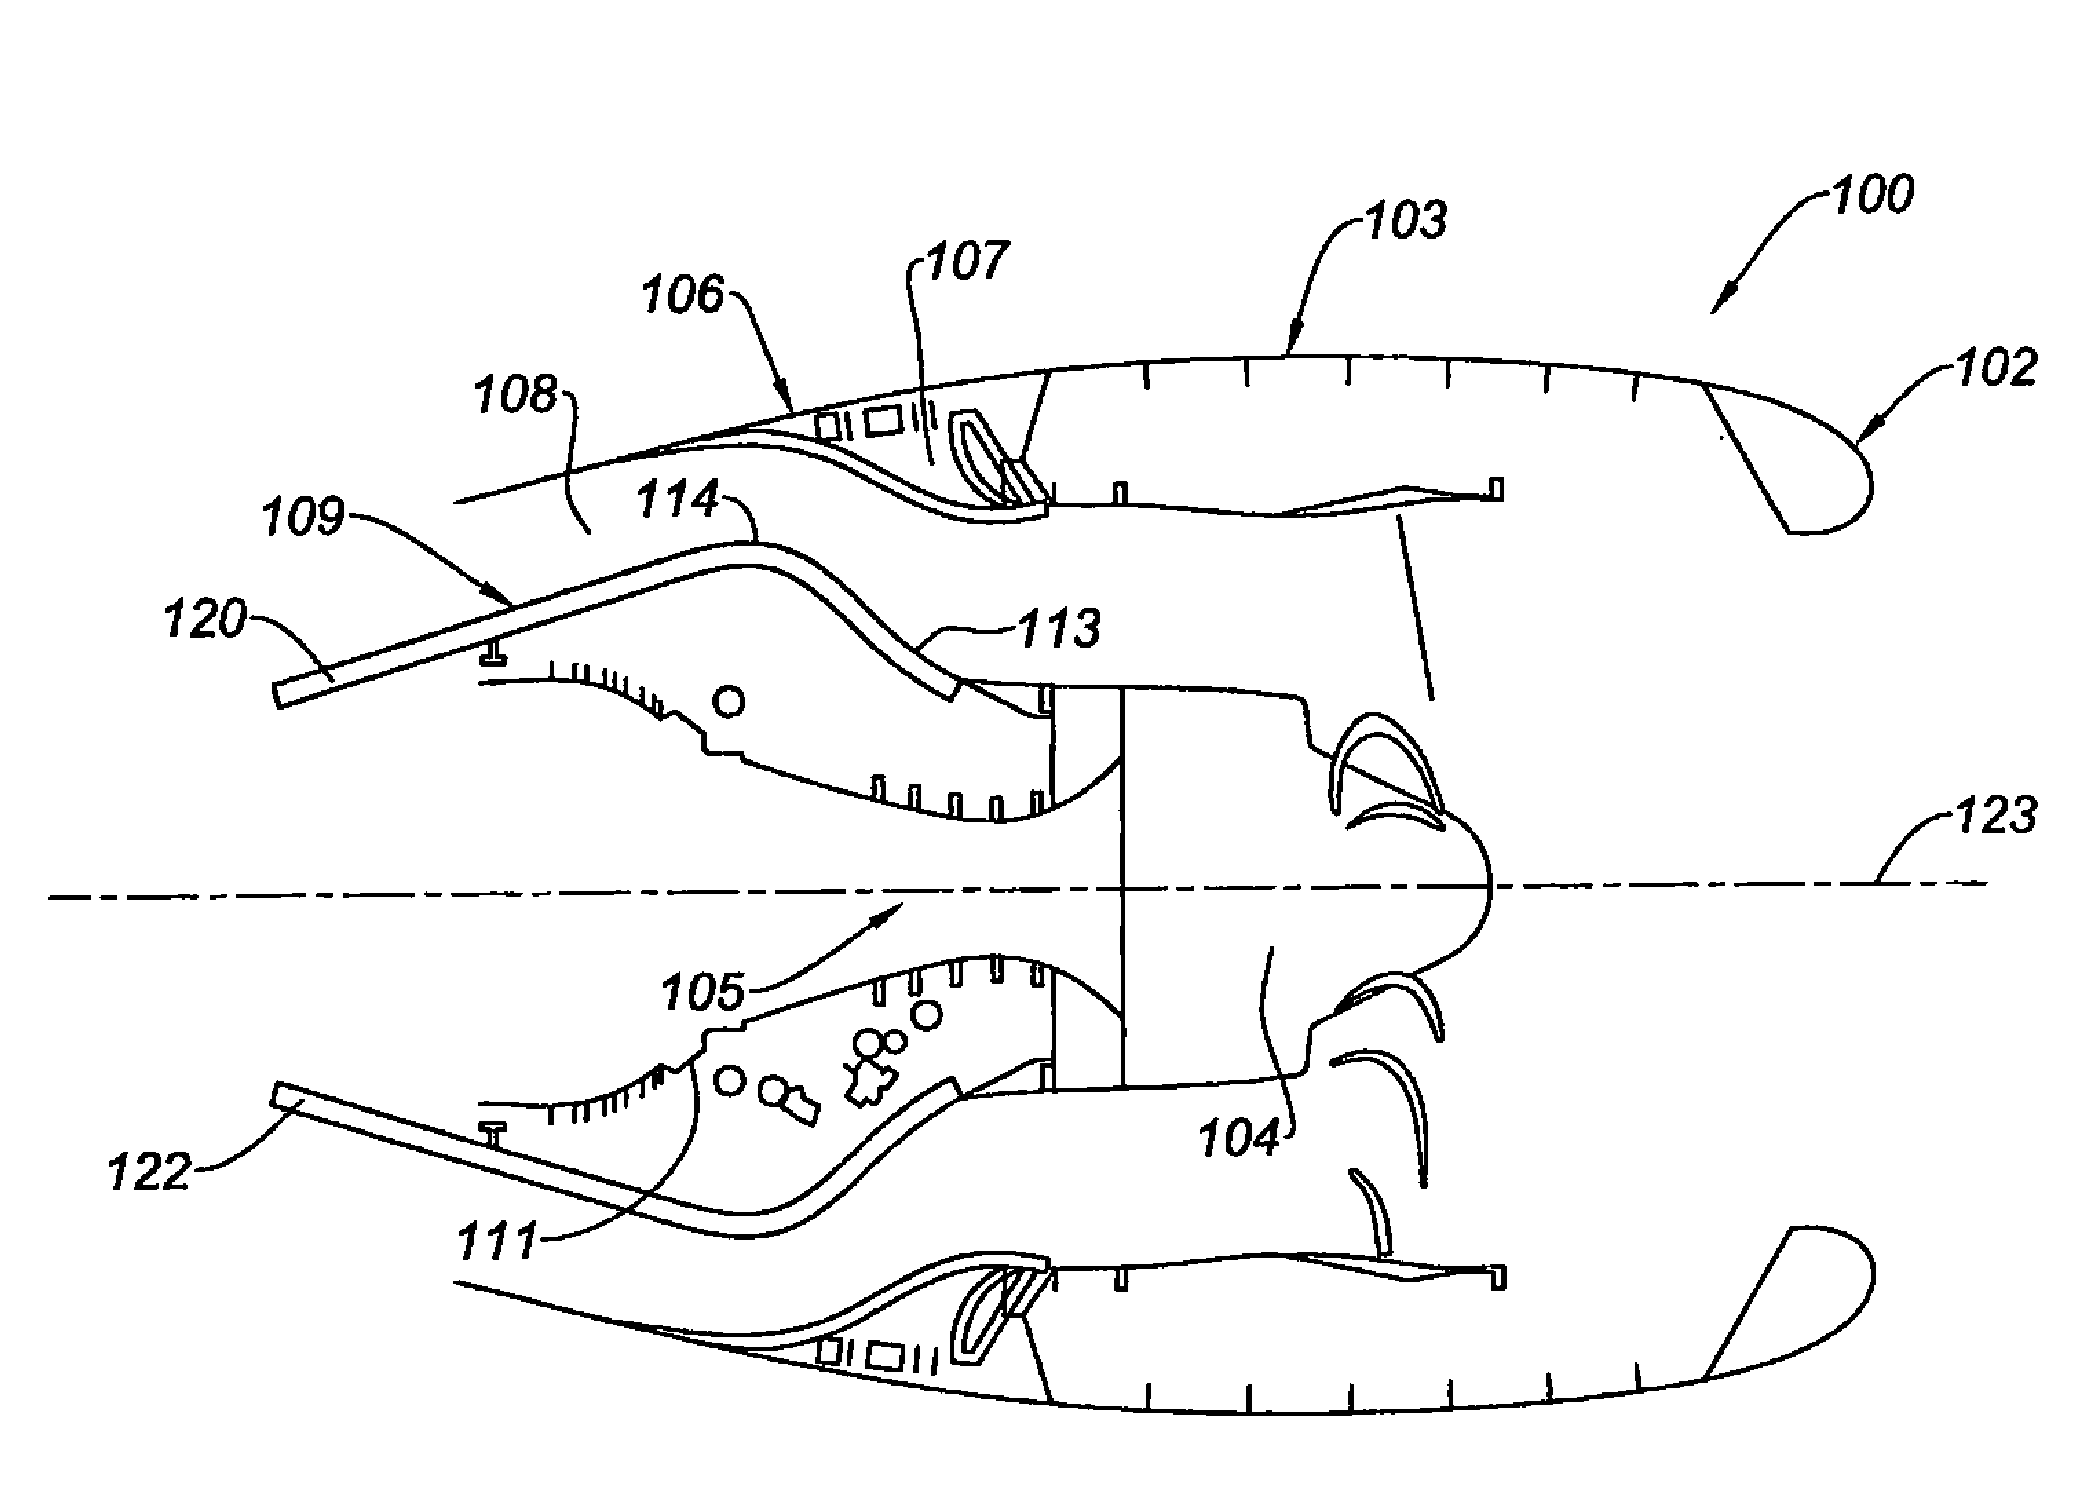 Guiding system for aircraft nacelle maintenance